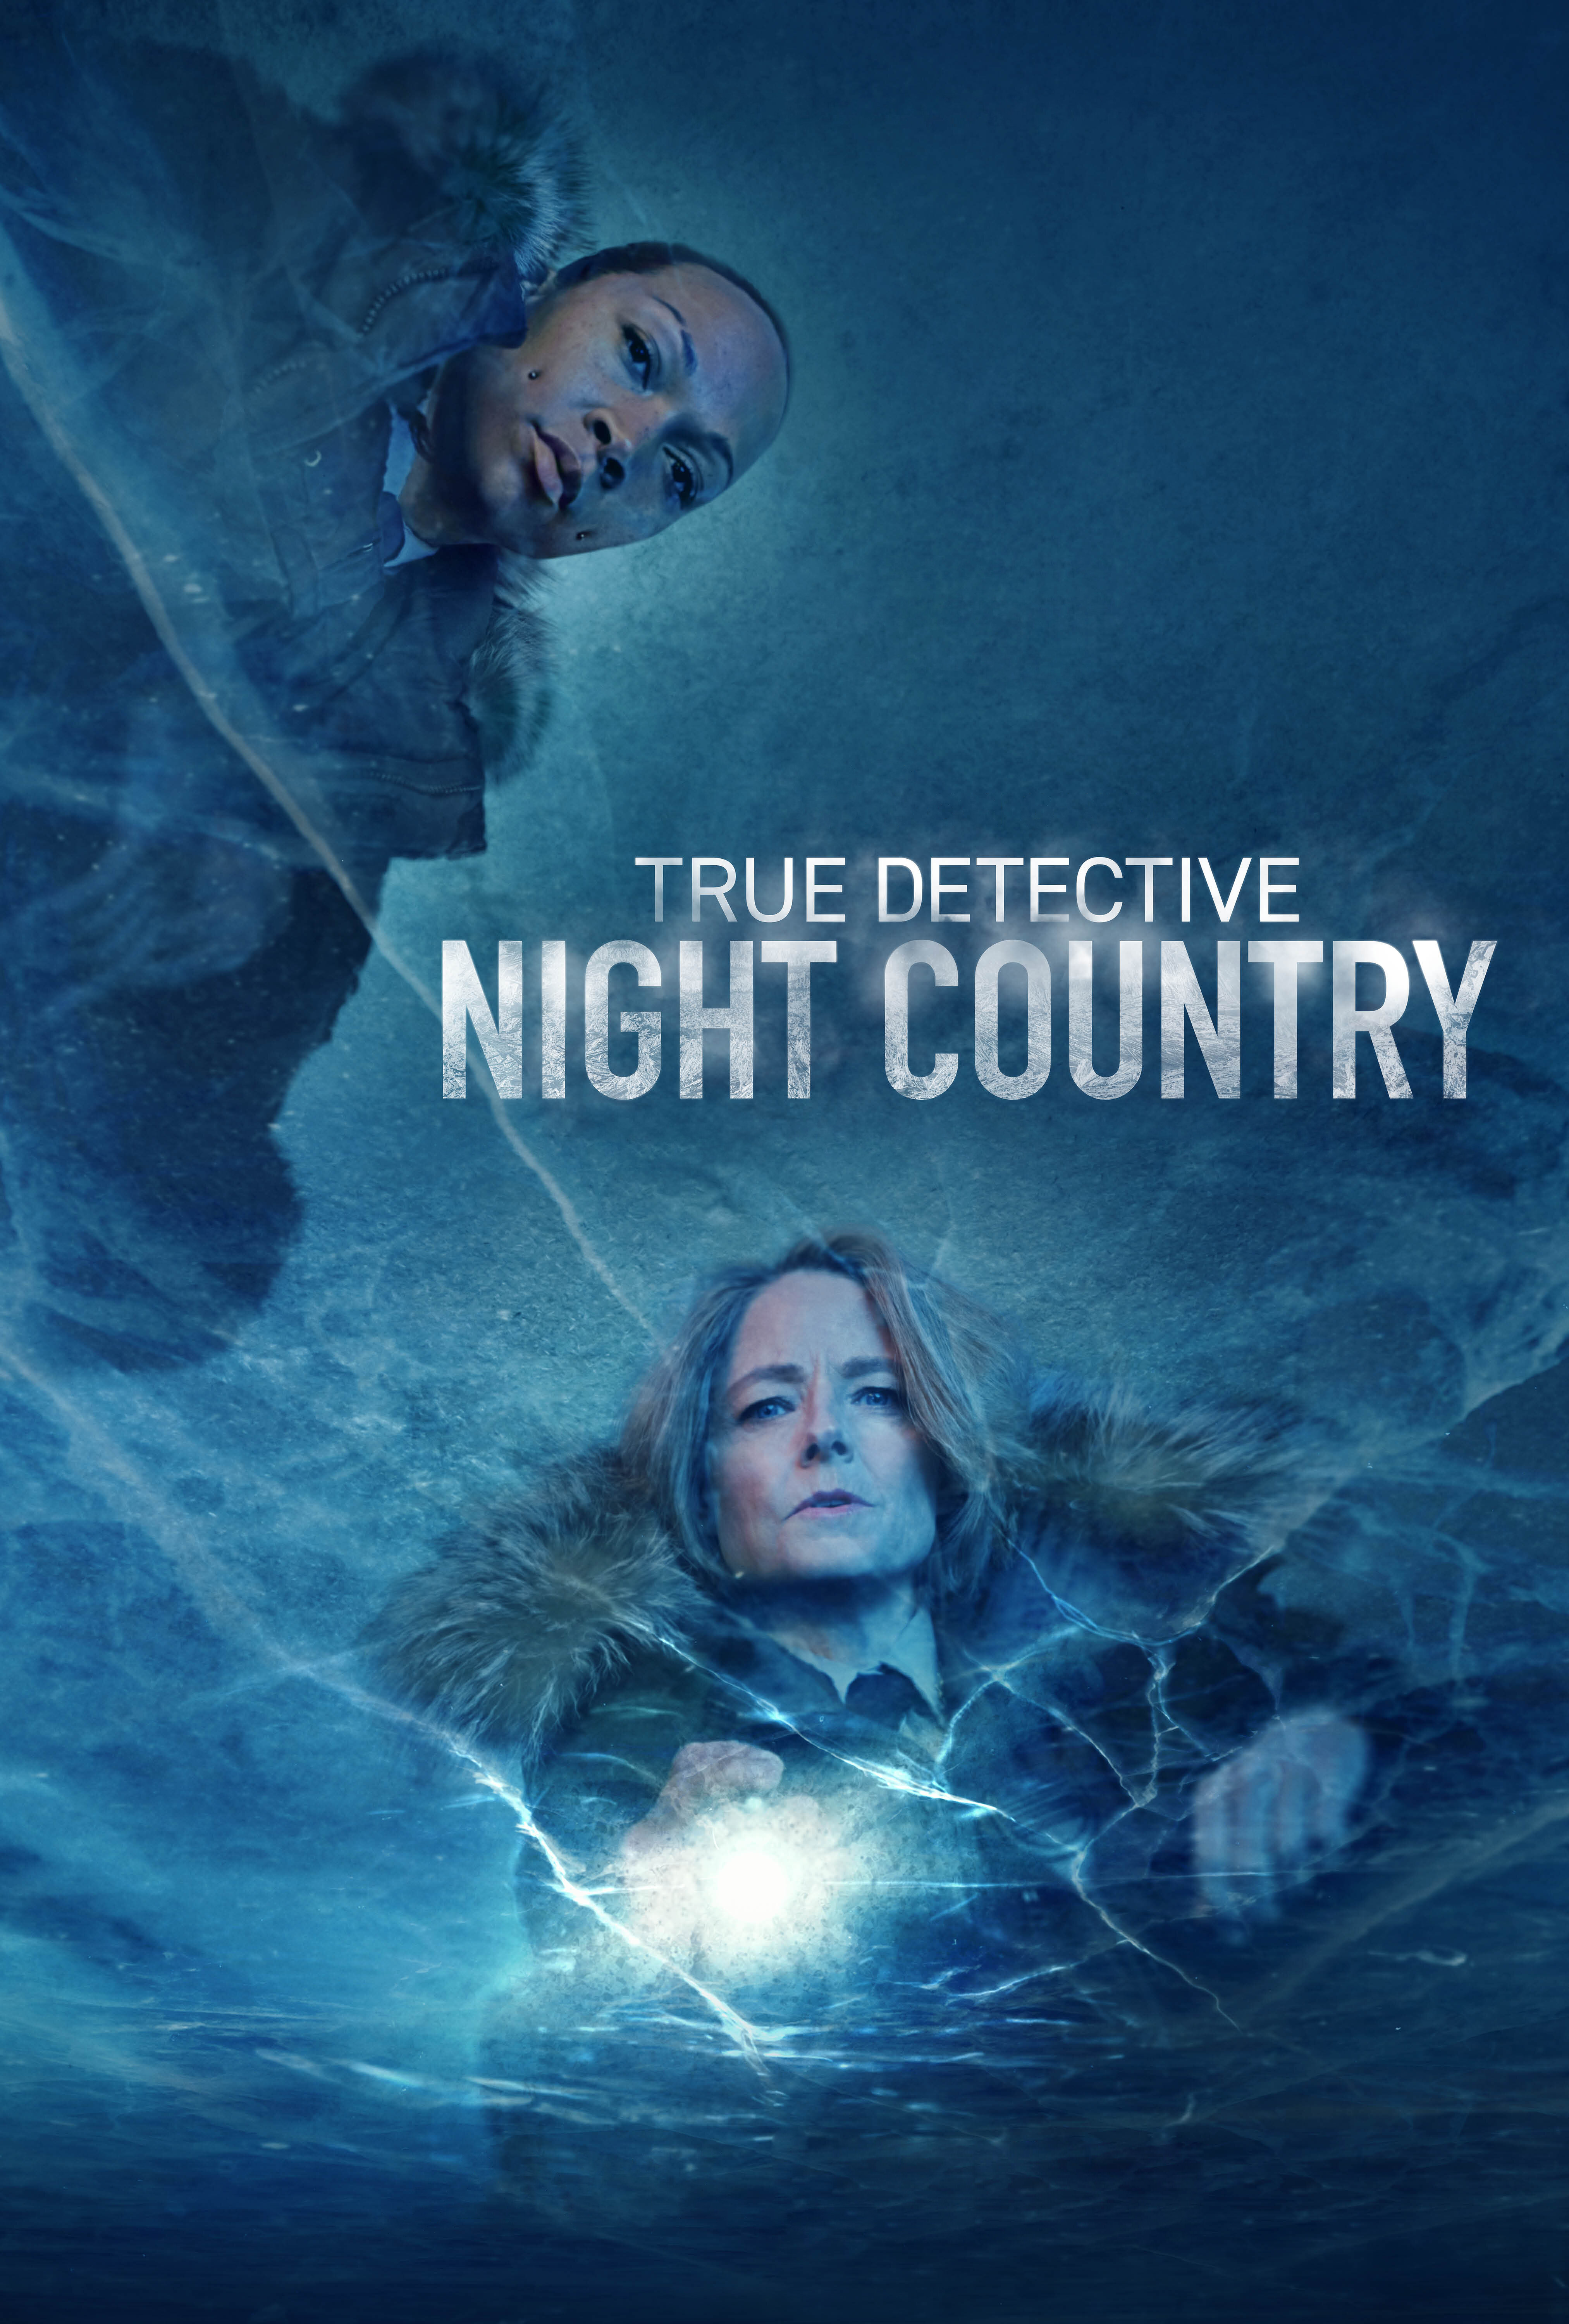 True Detective S04E04 Night Country Part 4 1080p AMZN WEB-DL DDP5 1 H 264-NTb